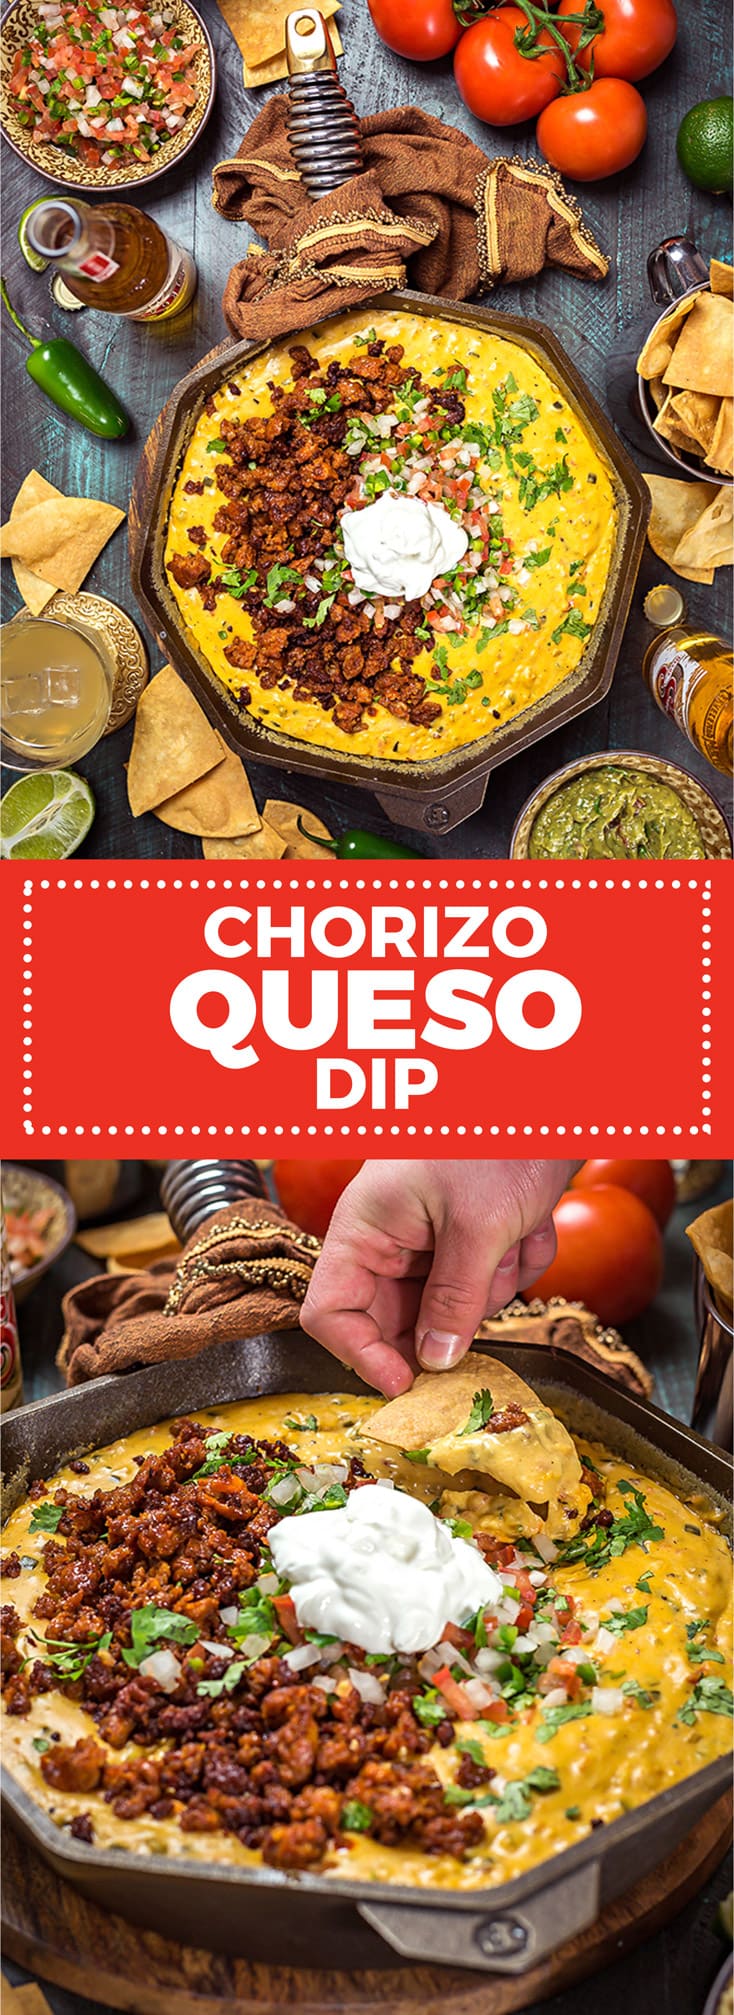 Chorizo Queso Dip. This is the ultimate, no fake cheese, no fuss cheese dip. | hostthetoast.com